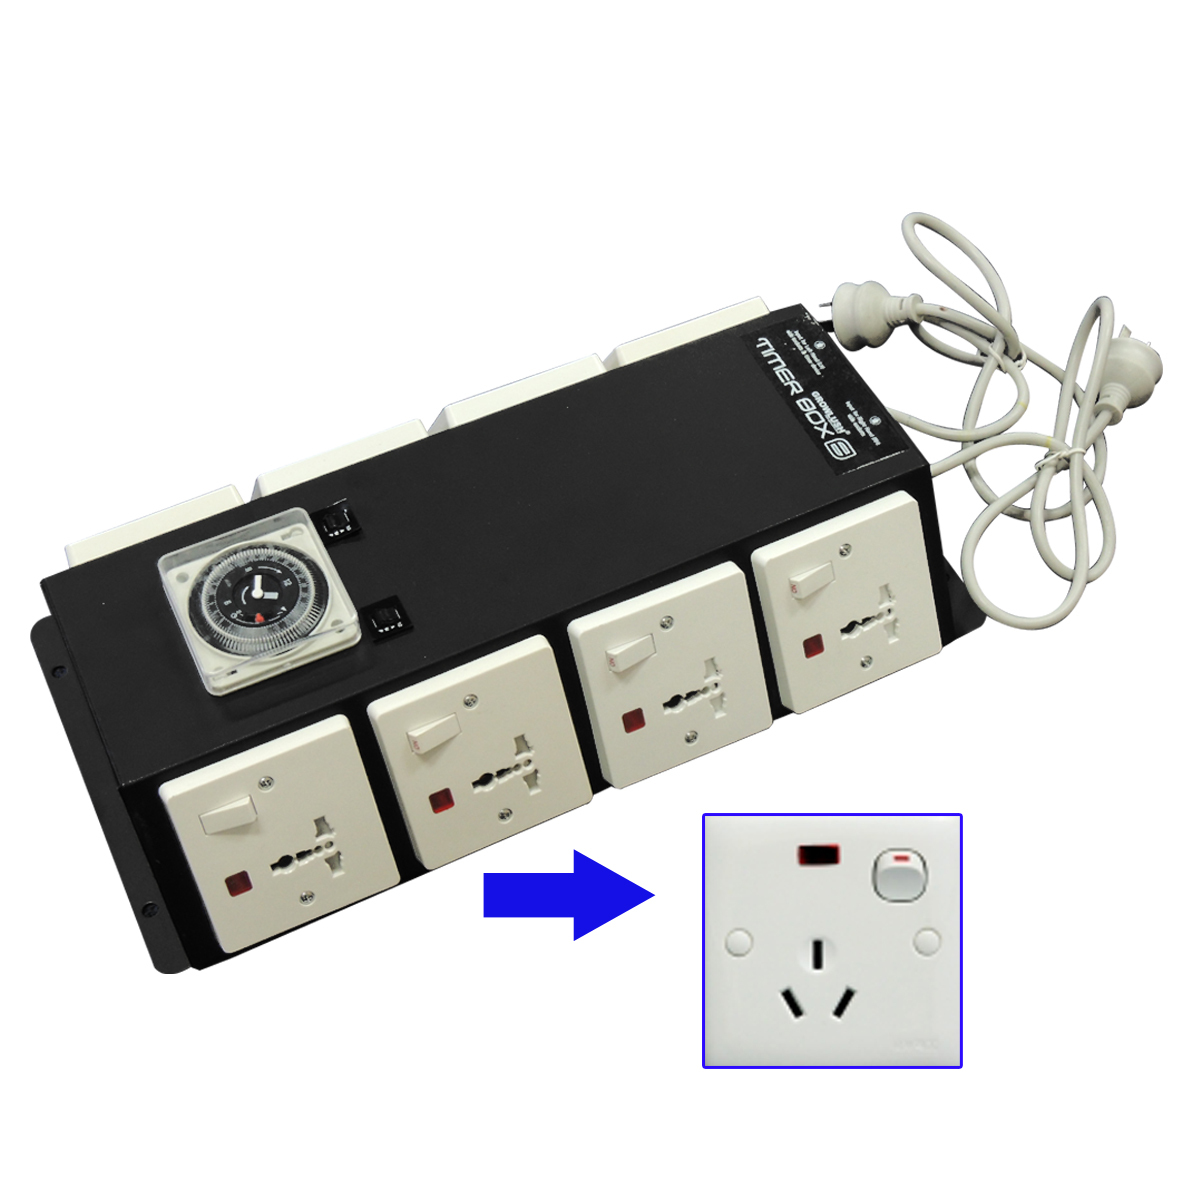 8 outlet budget timer box - with 2 input plugs